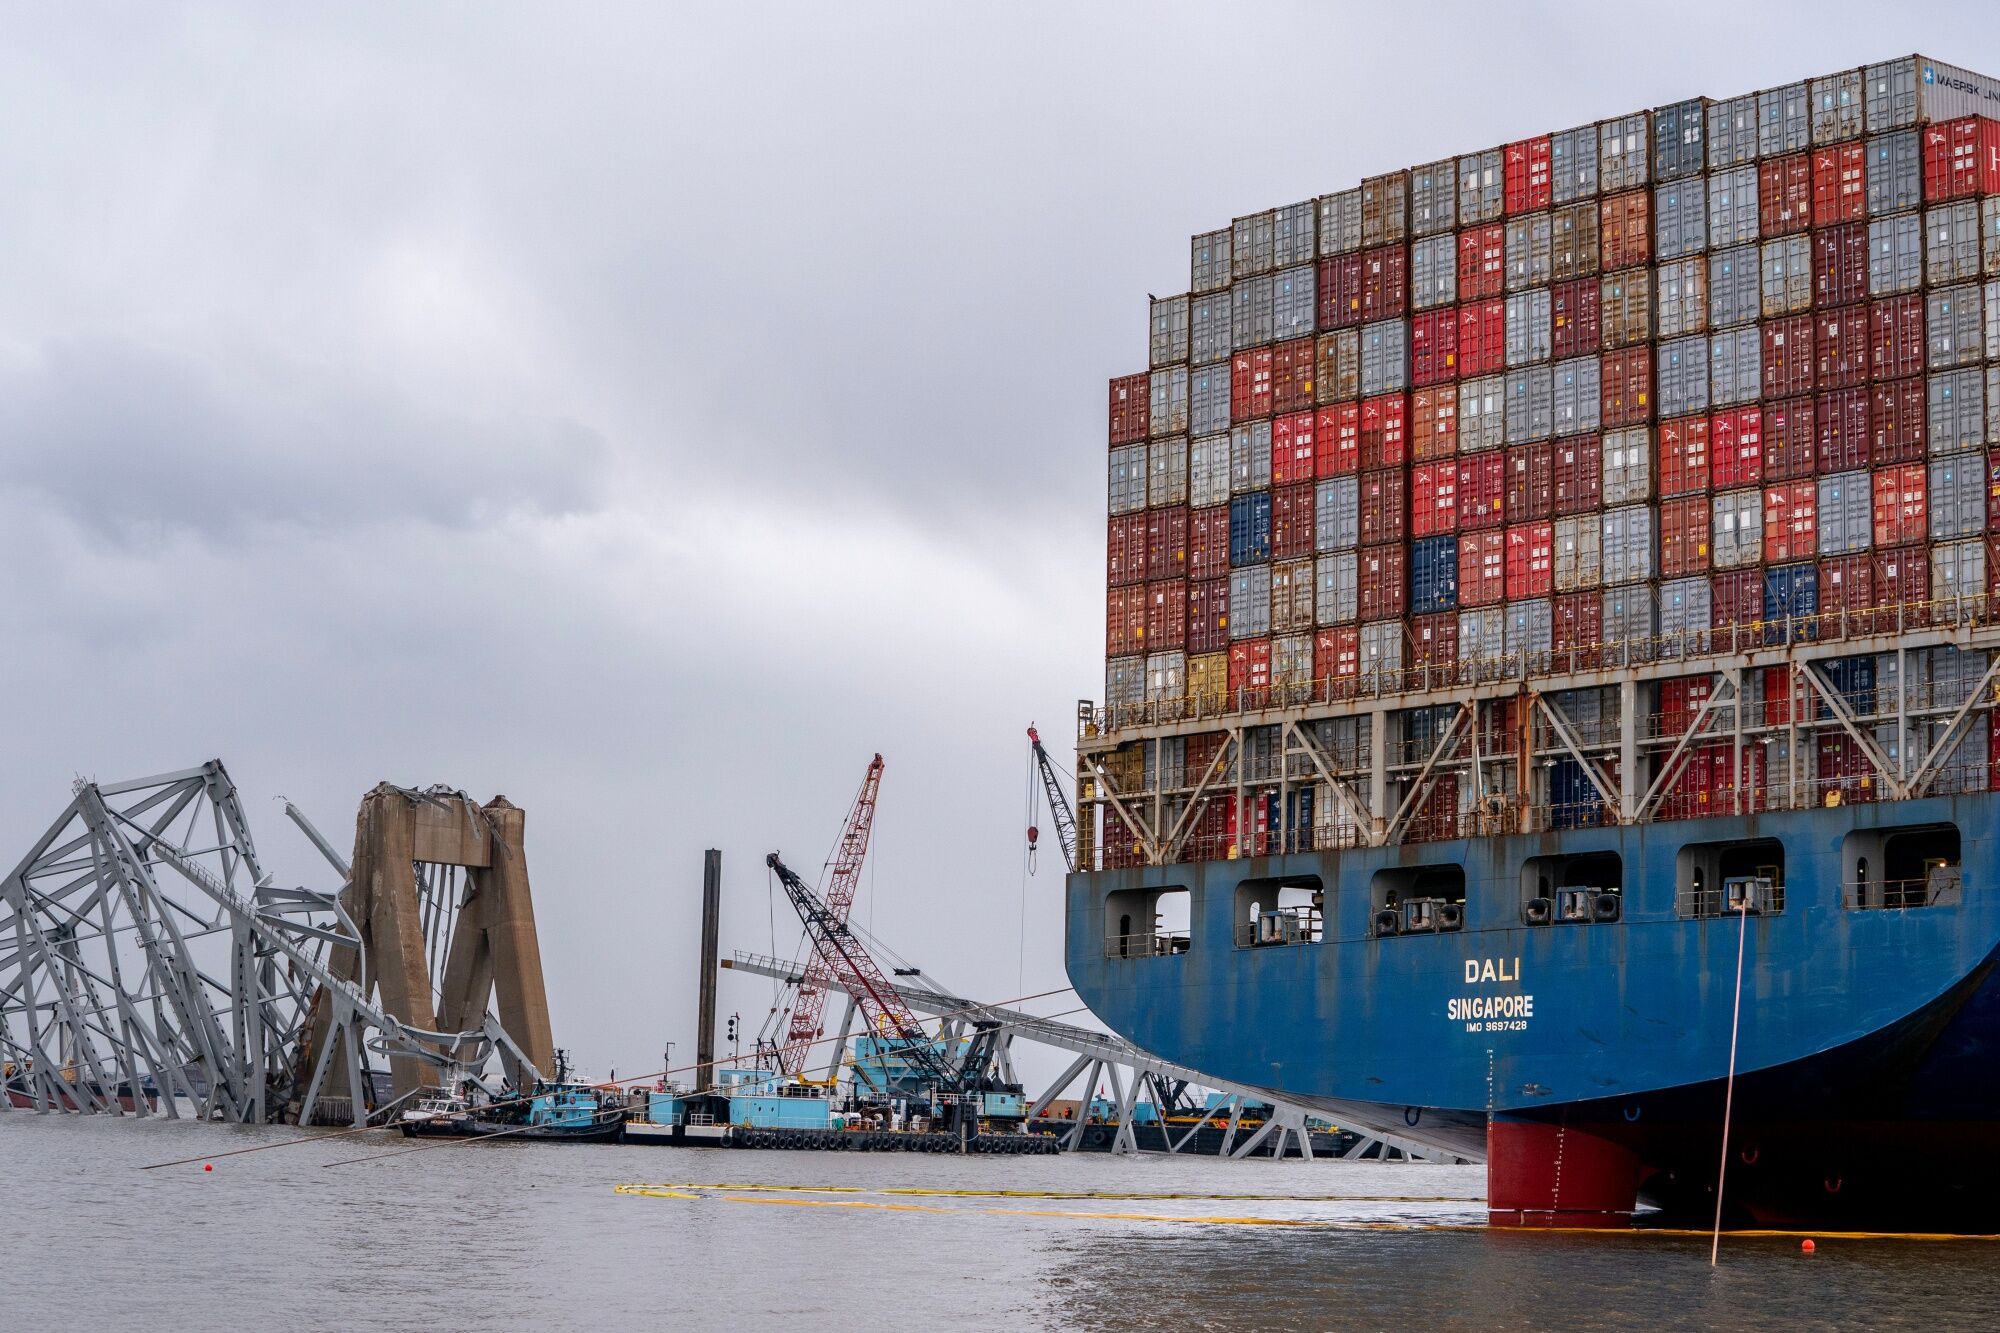 firms in beige book fret over any lengthy baltimore port closure